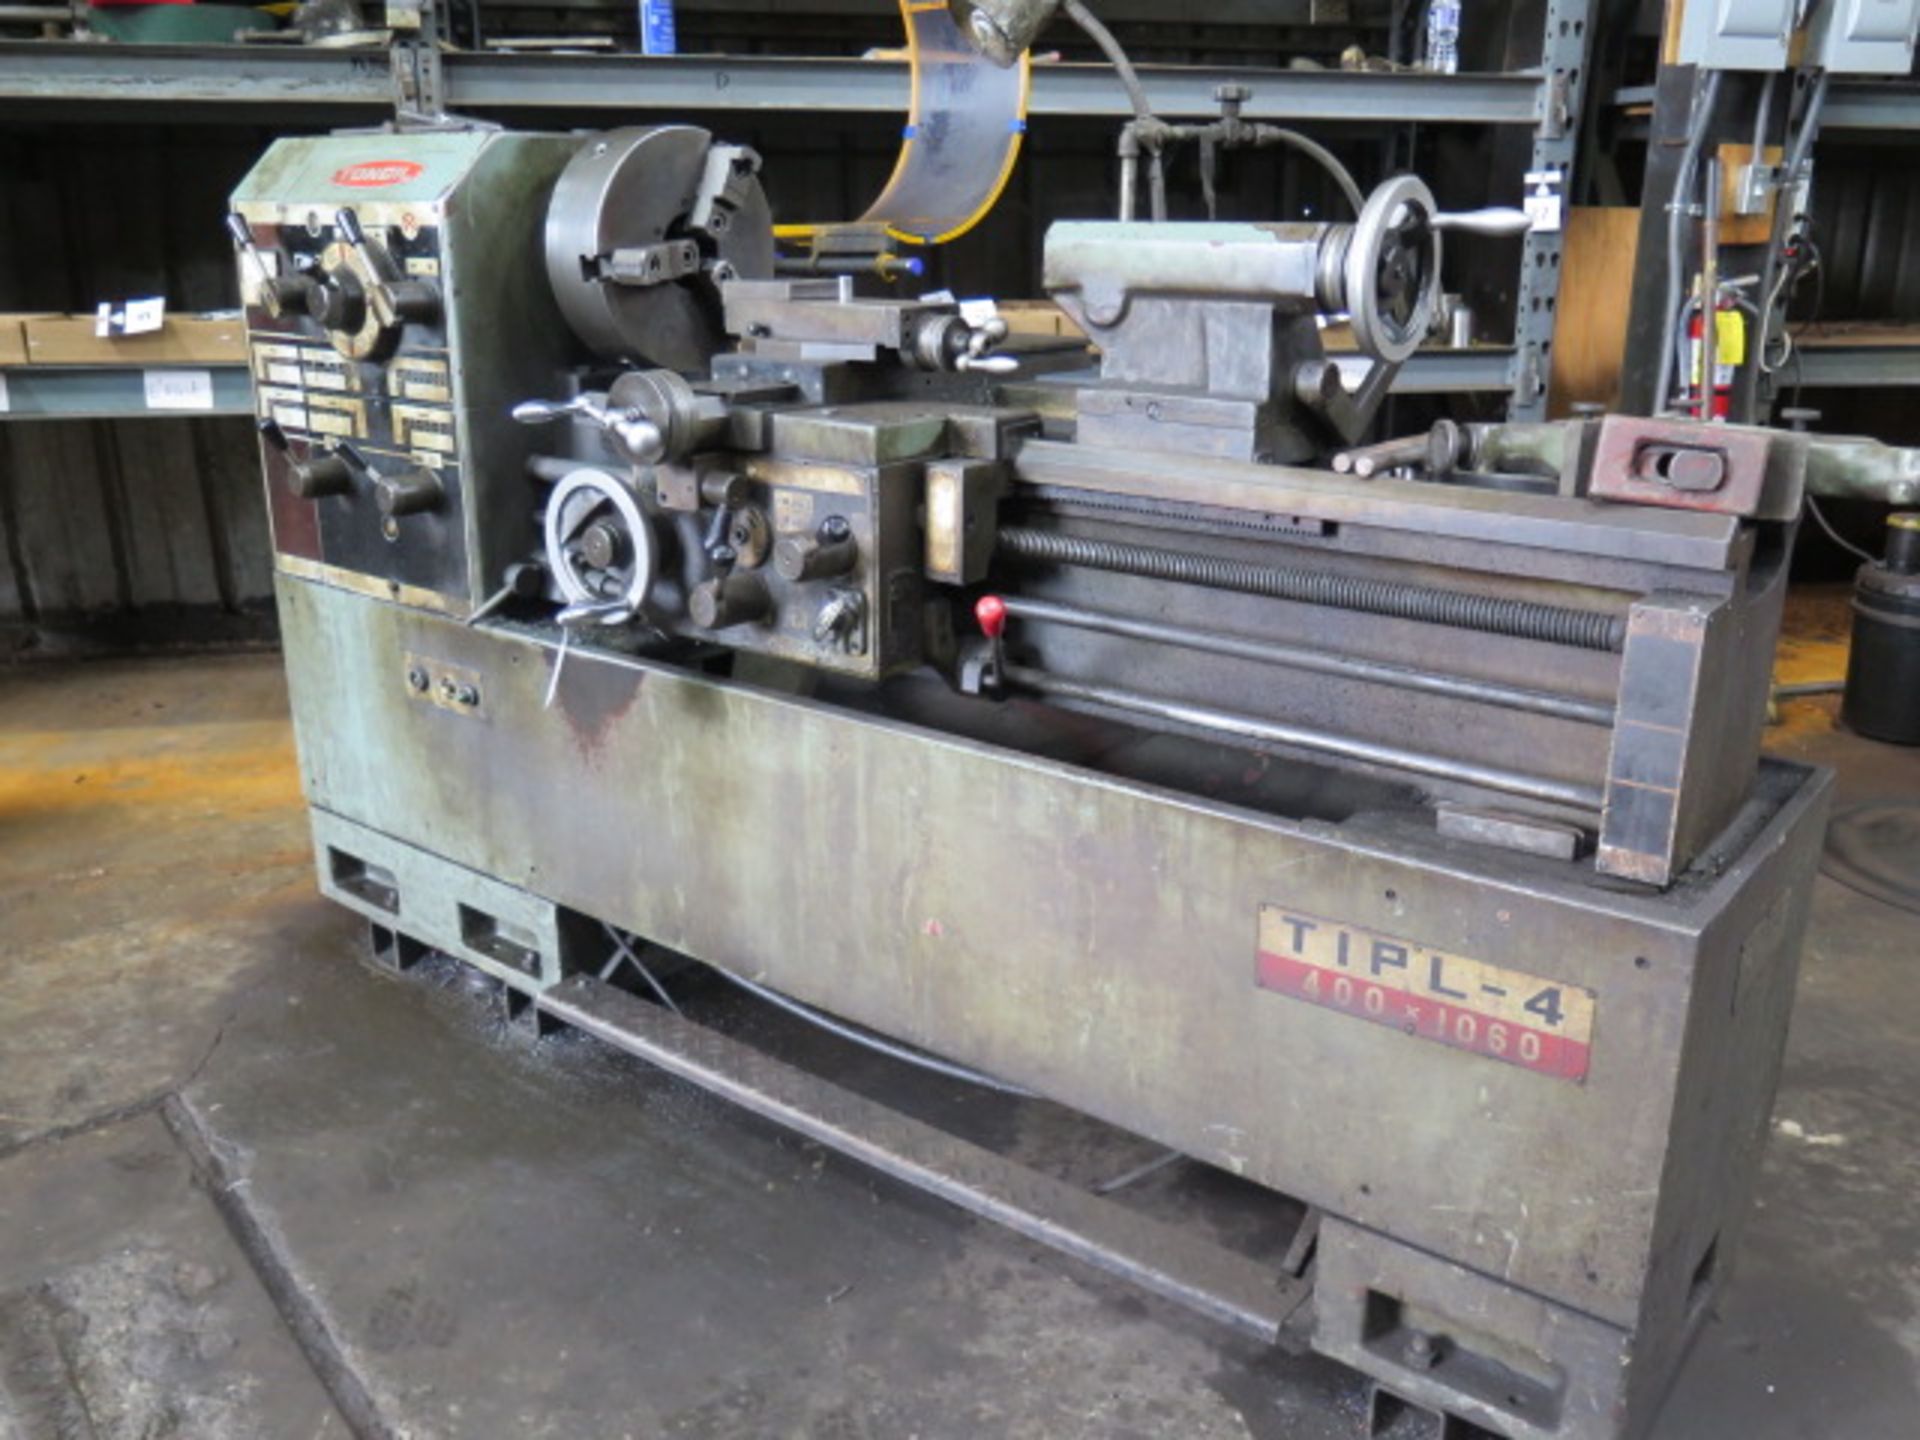 Tongil TIPL-4 15” x 42” Geared Head Gap Bed Lathe w/ 60-1500 RPM, Inch/mm Threading, SOLD AS IS - Image 3 of 12